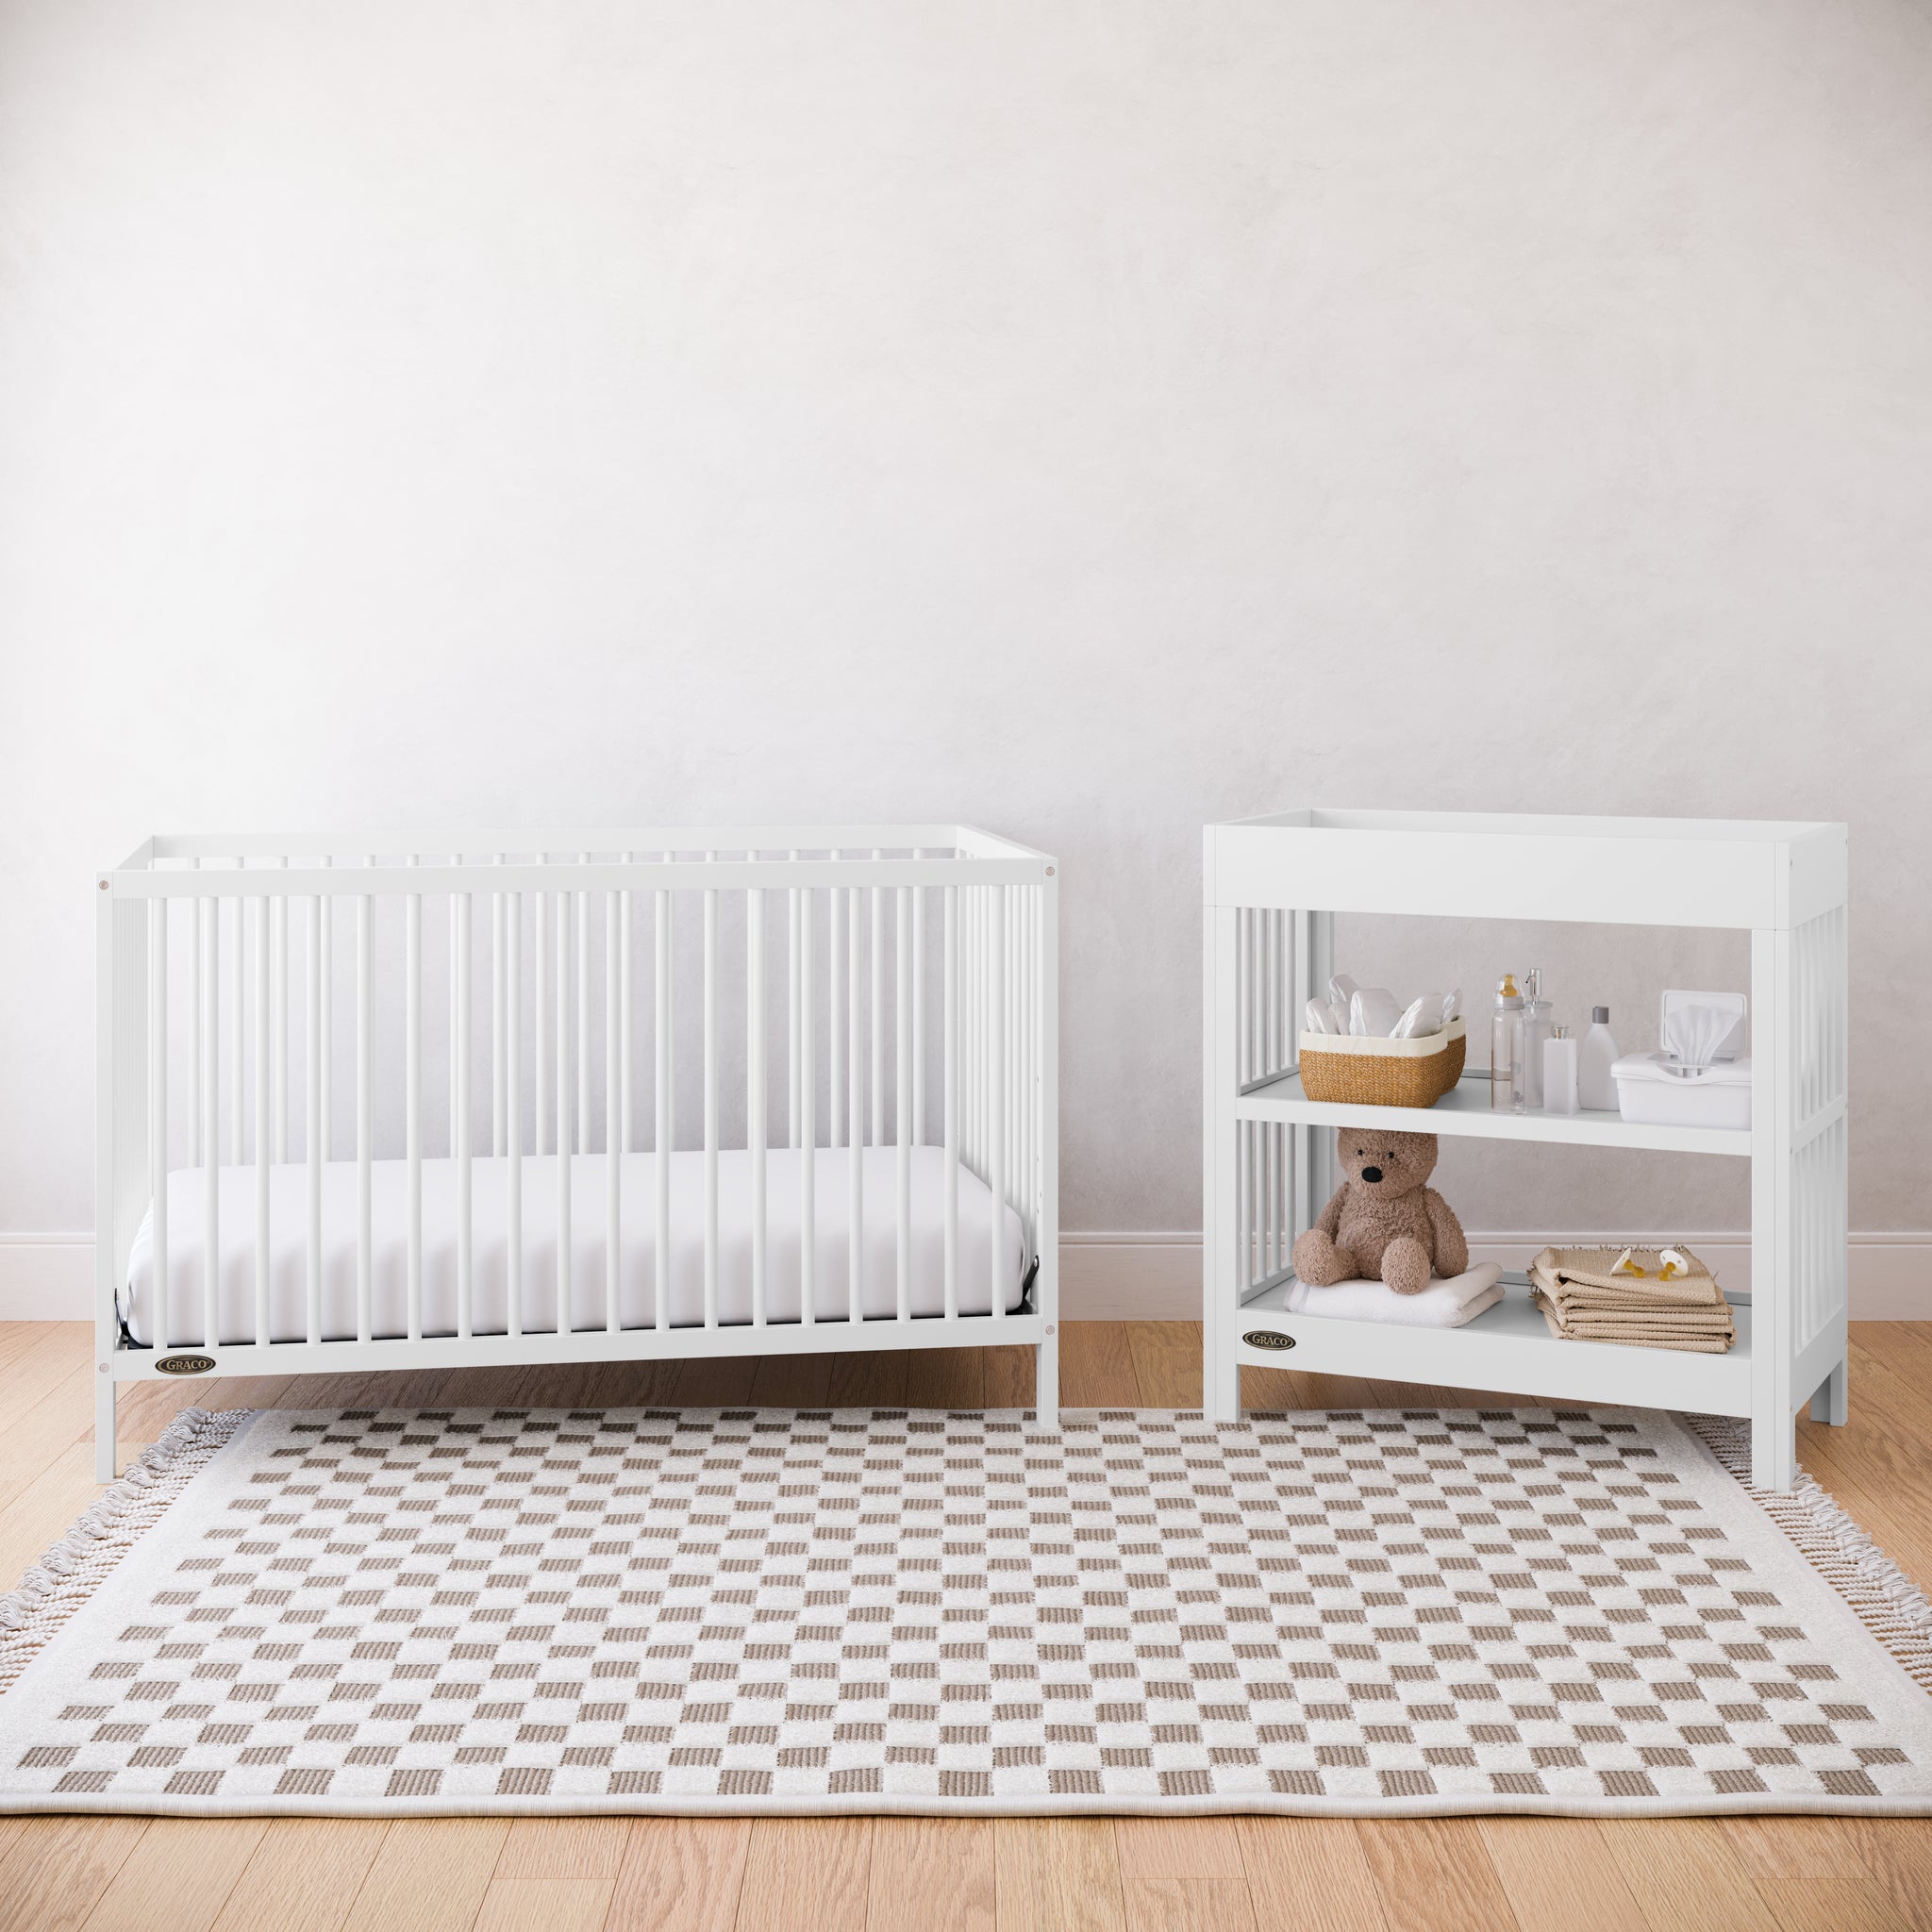 White crib and changing table in a nursery